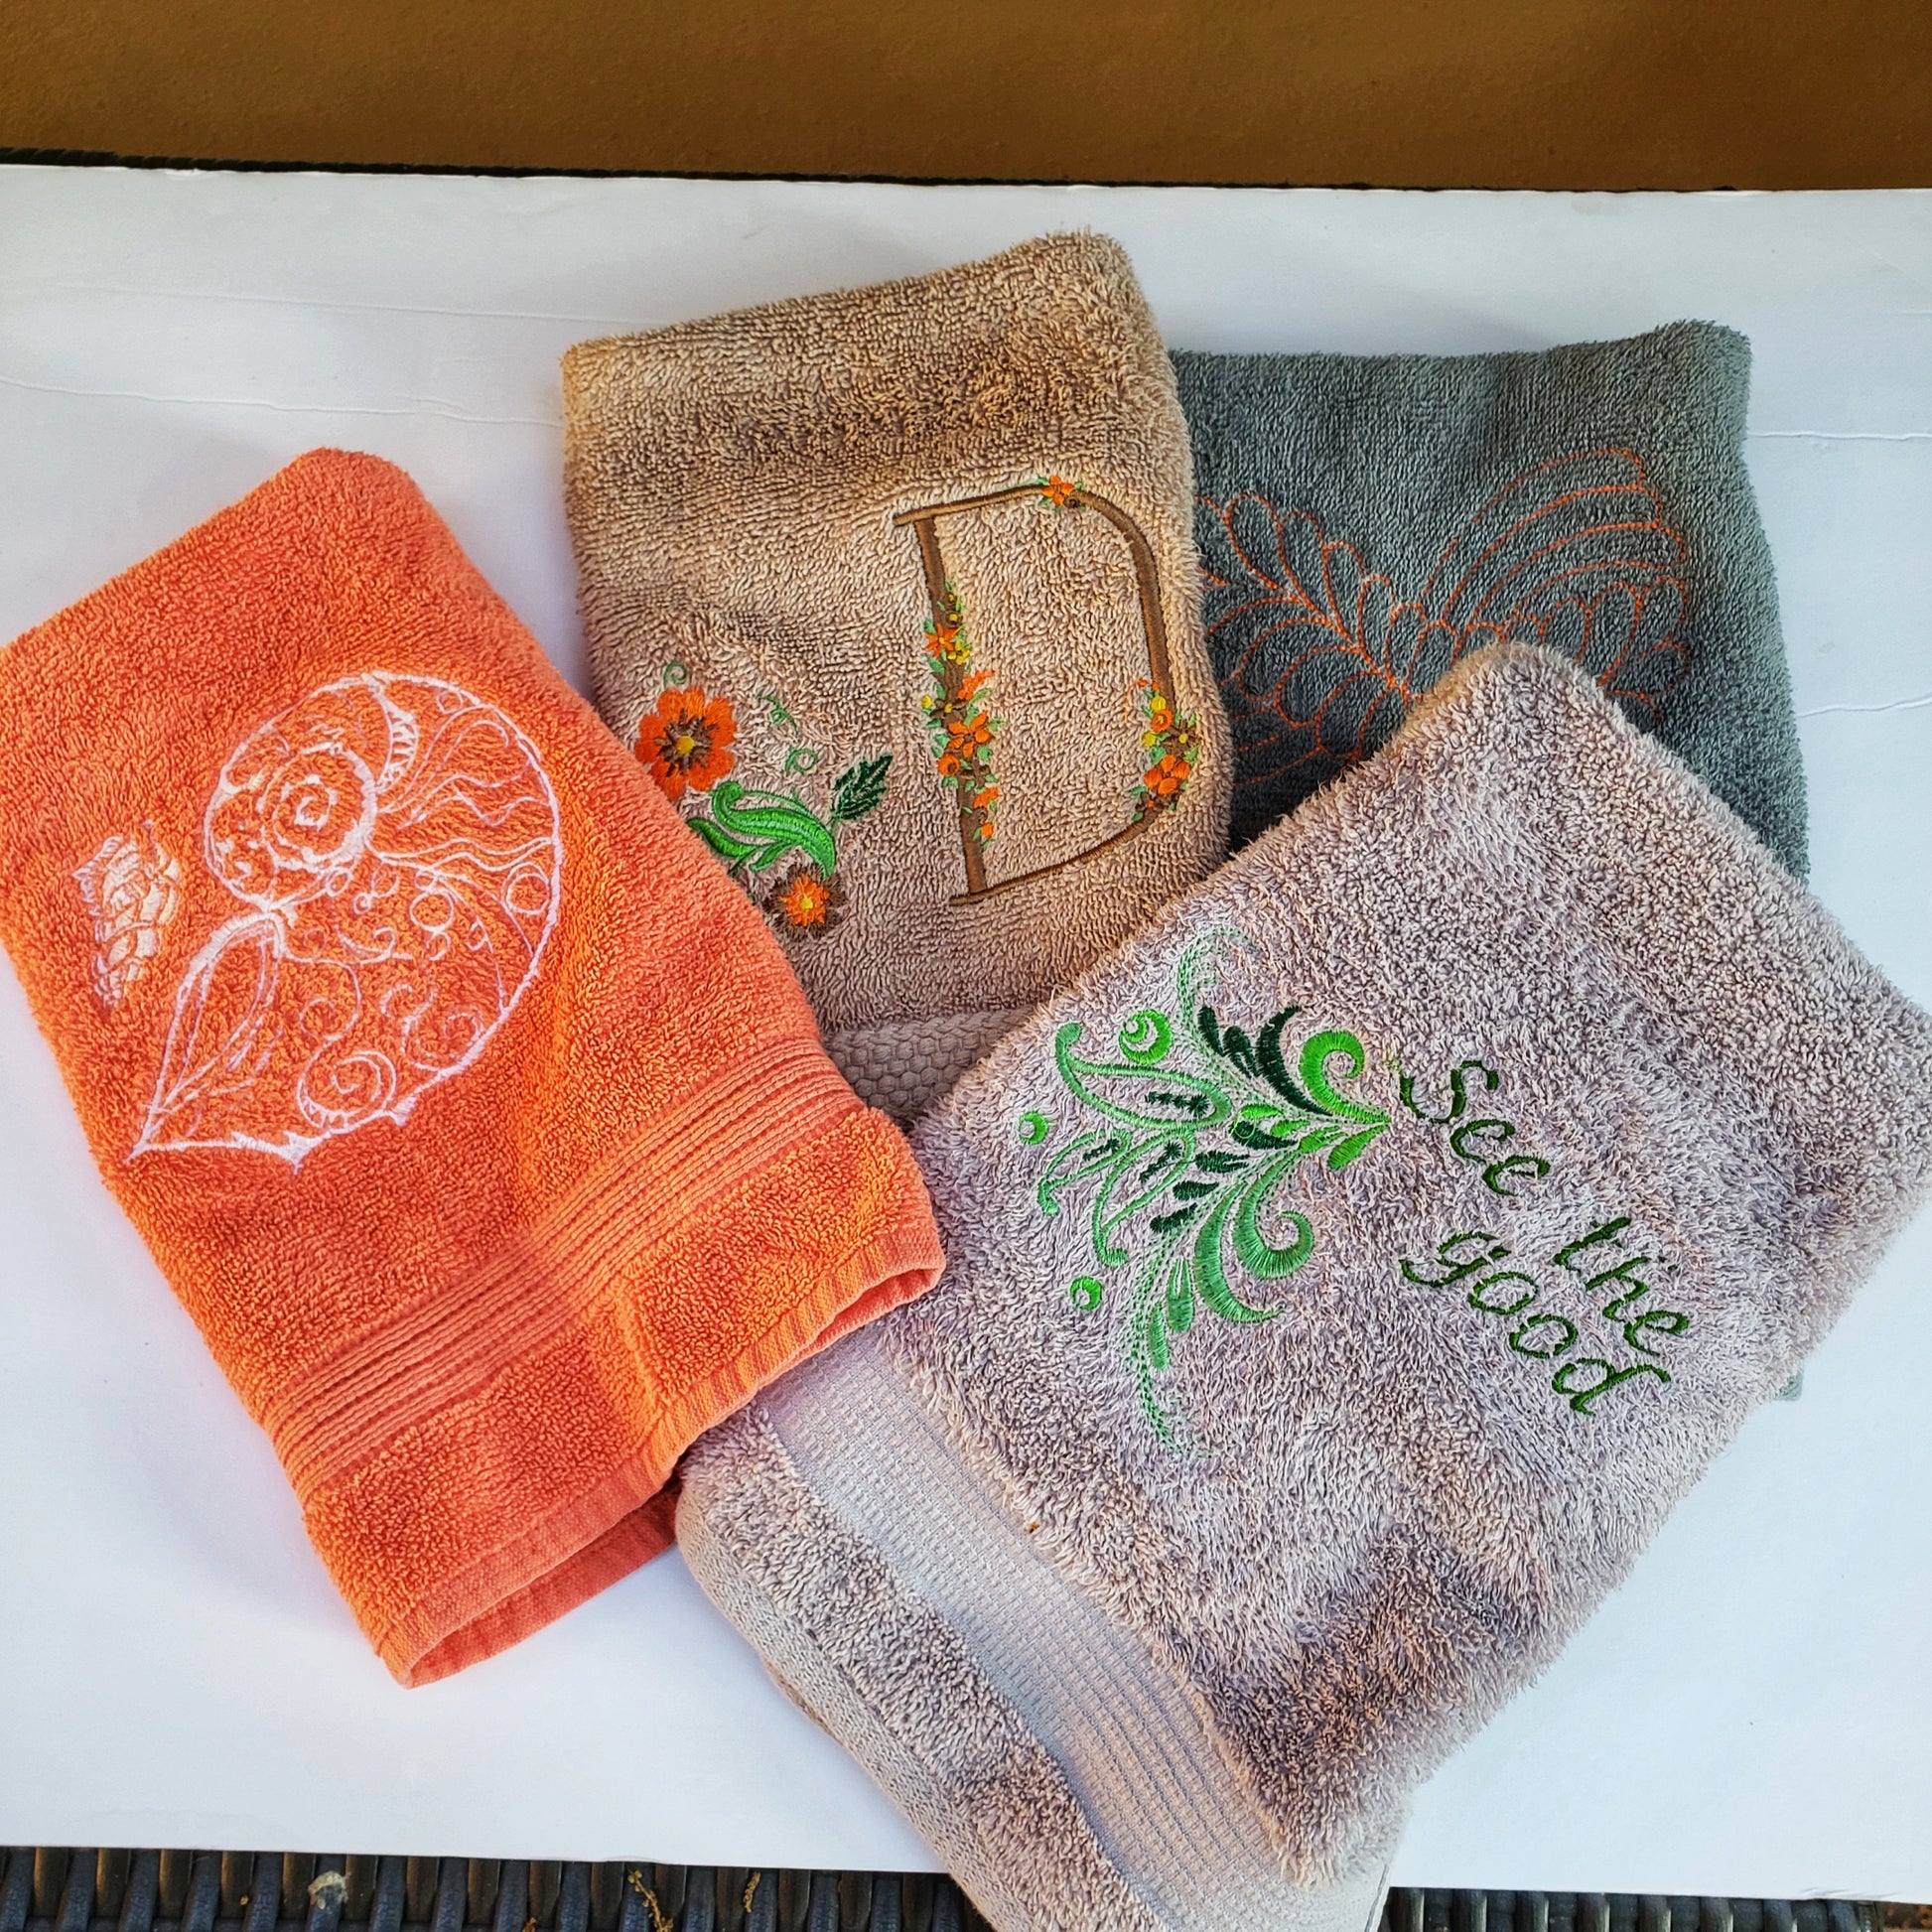 Personalized embroidery towels